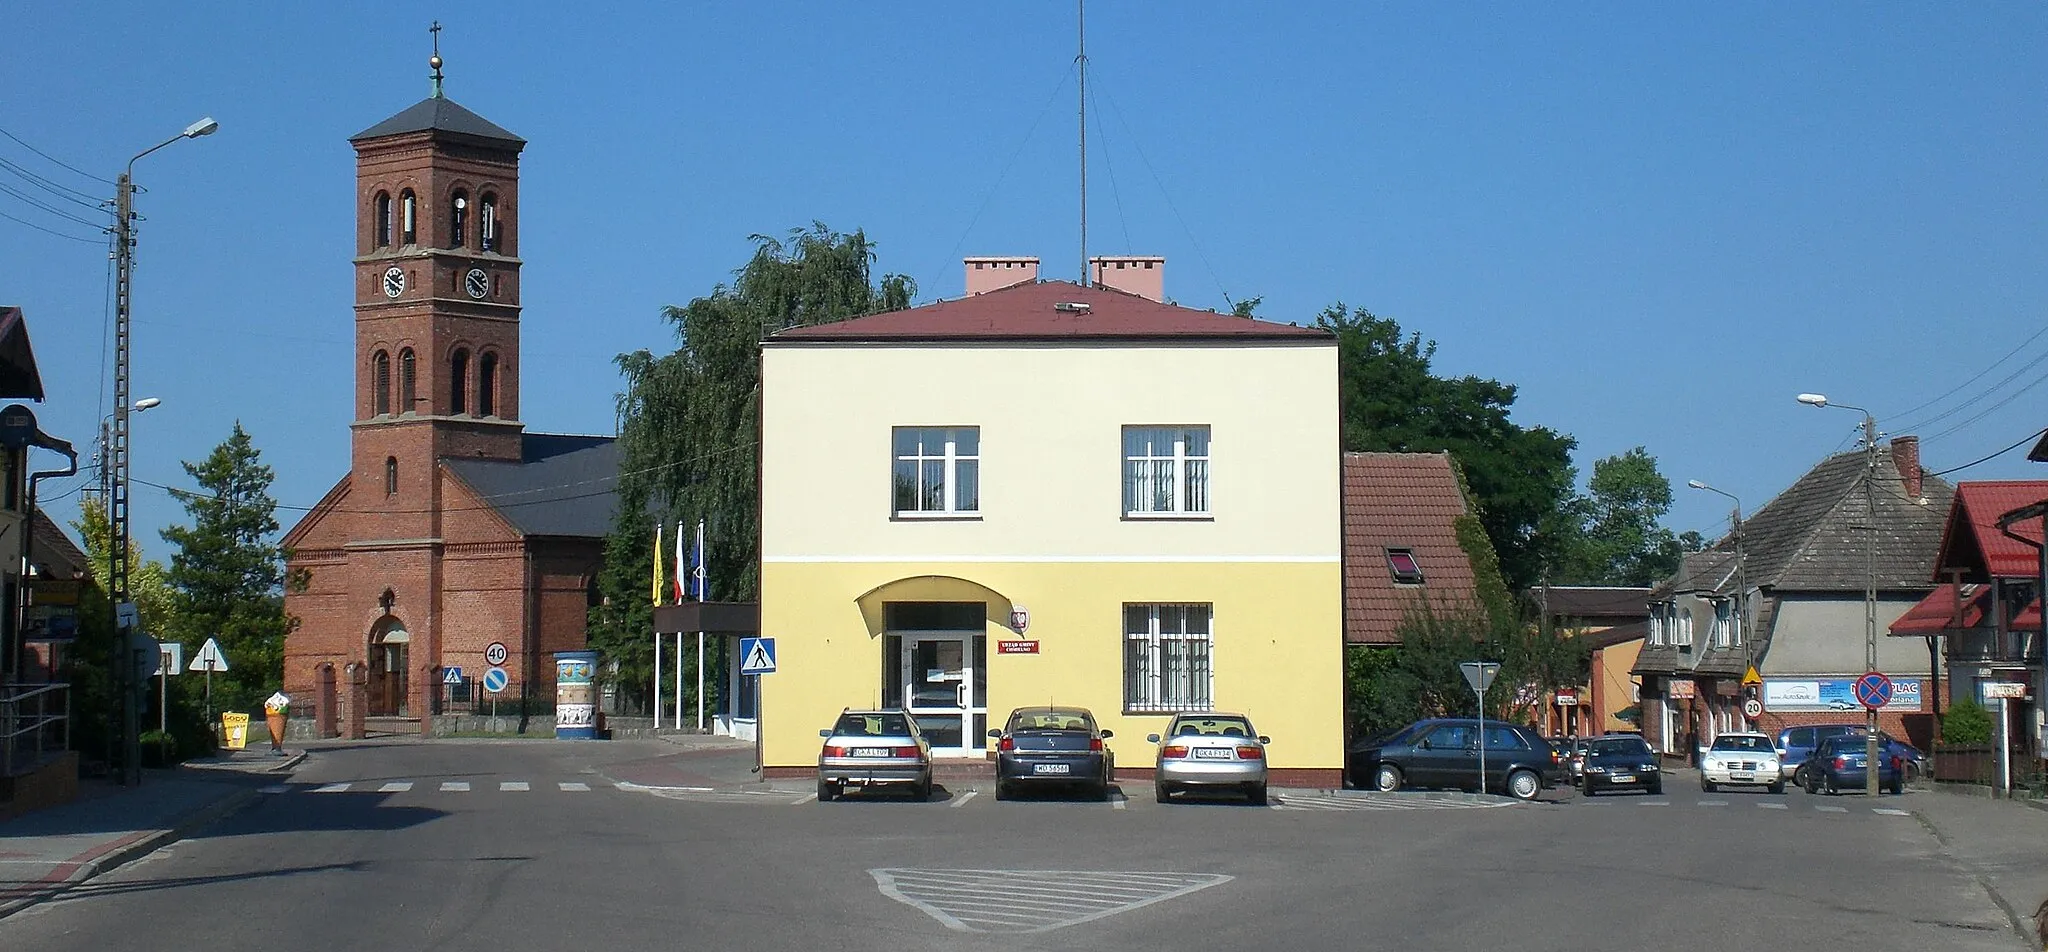 Photo showing: Chmielno - village center, from left St. Peter & Paul Church